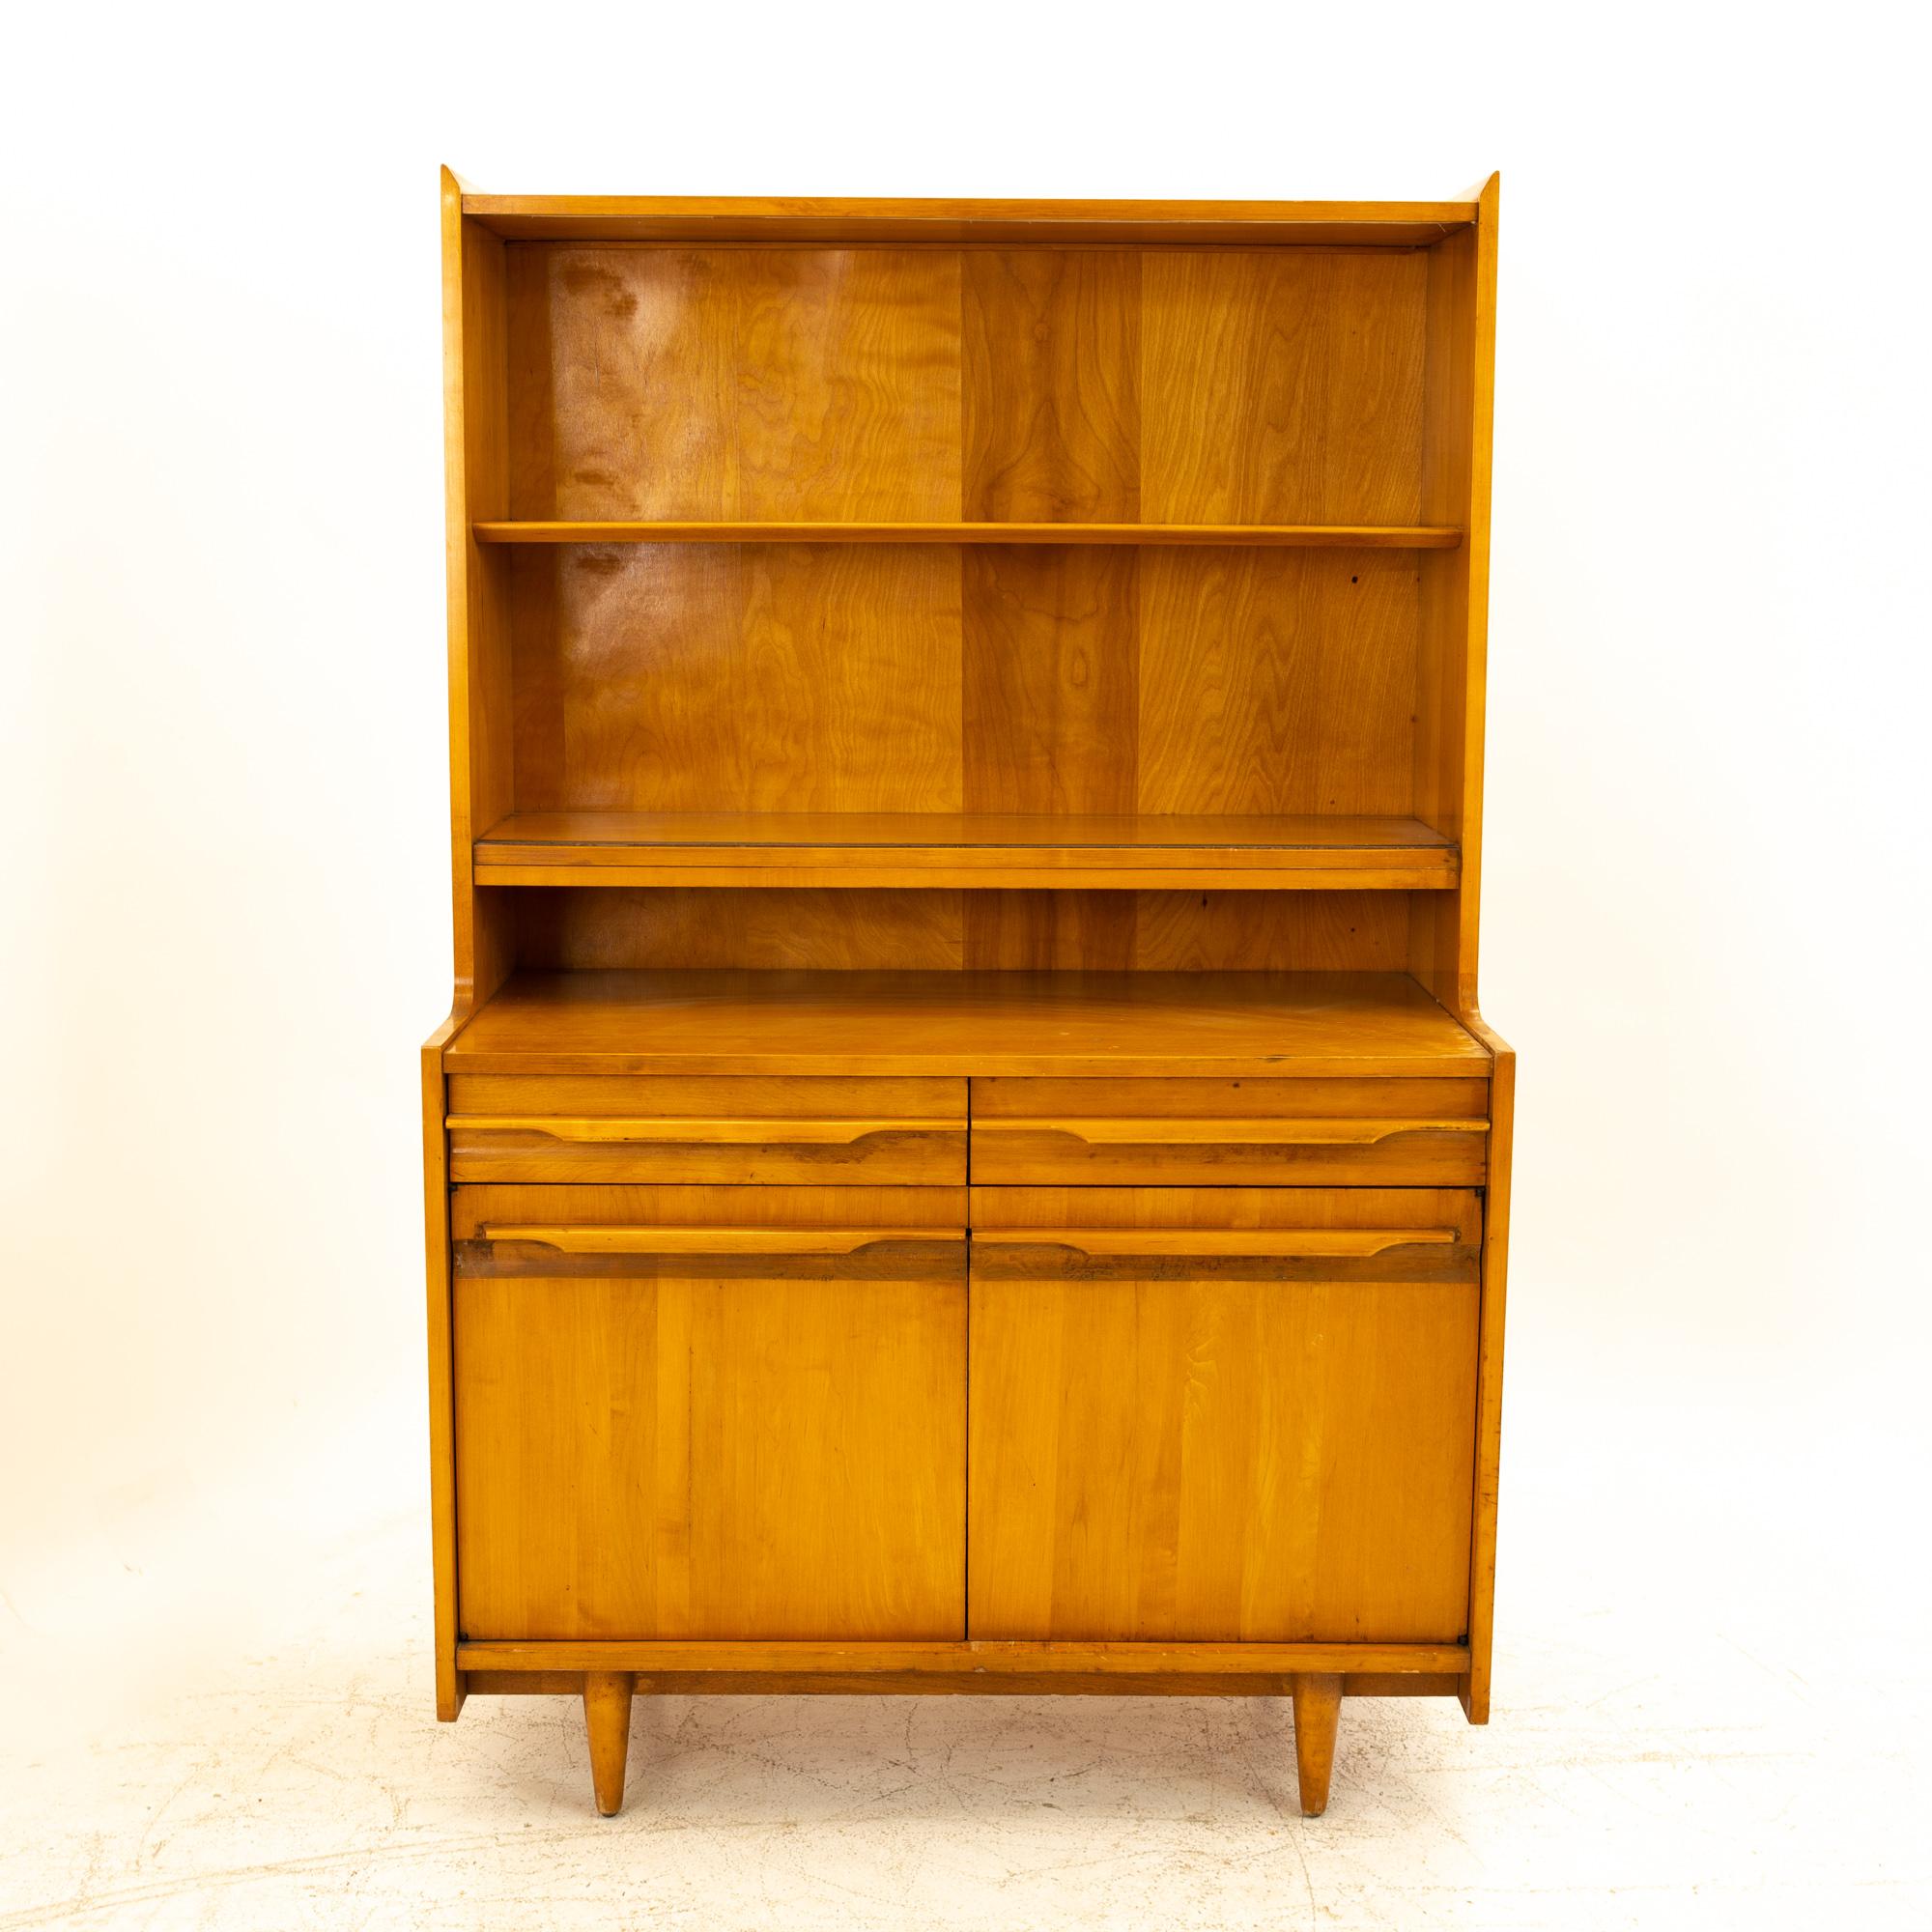 Milo Baughman style Crawford Furniture midcentury blonde buffet and hutch

Hutch measures: 38 wide x 19.25 deep x 60 high

All pieces of furniture can be had in what we call restored vintage condition. That means the piece is restored upon purchase